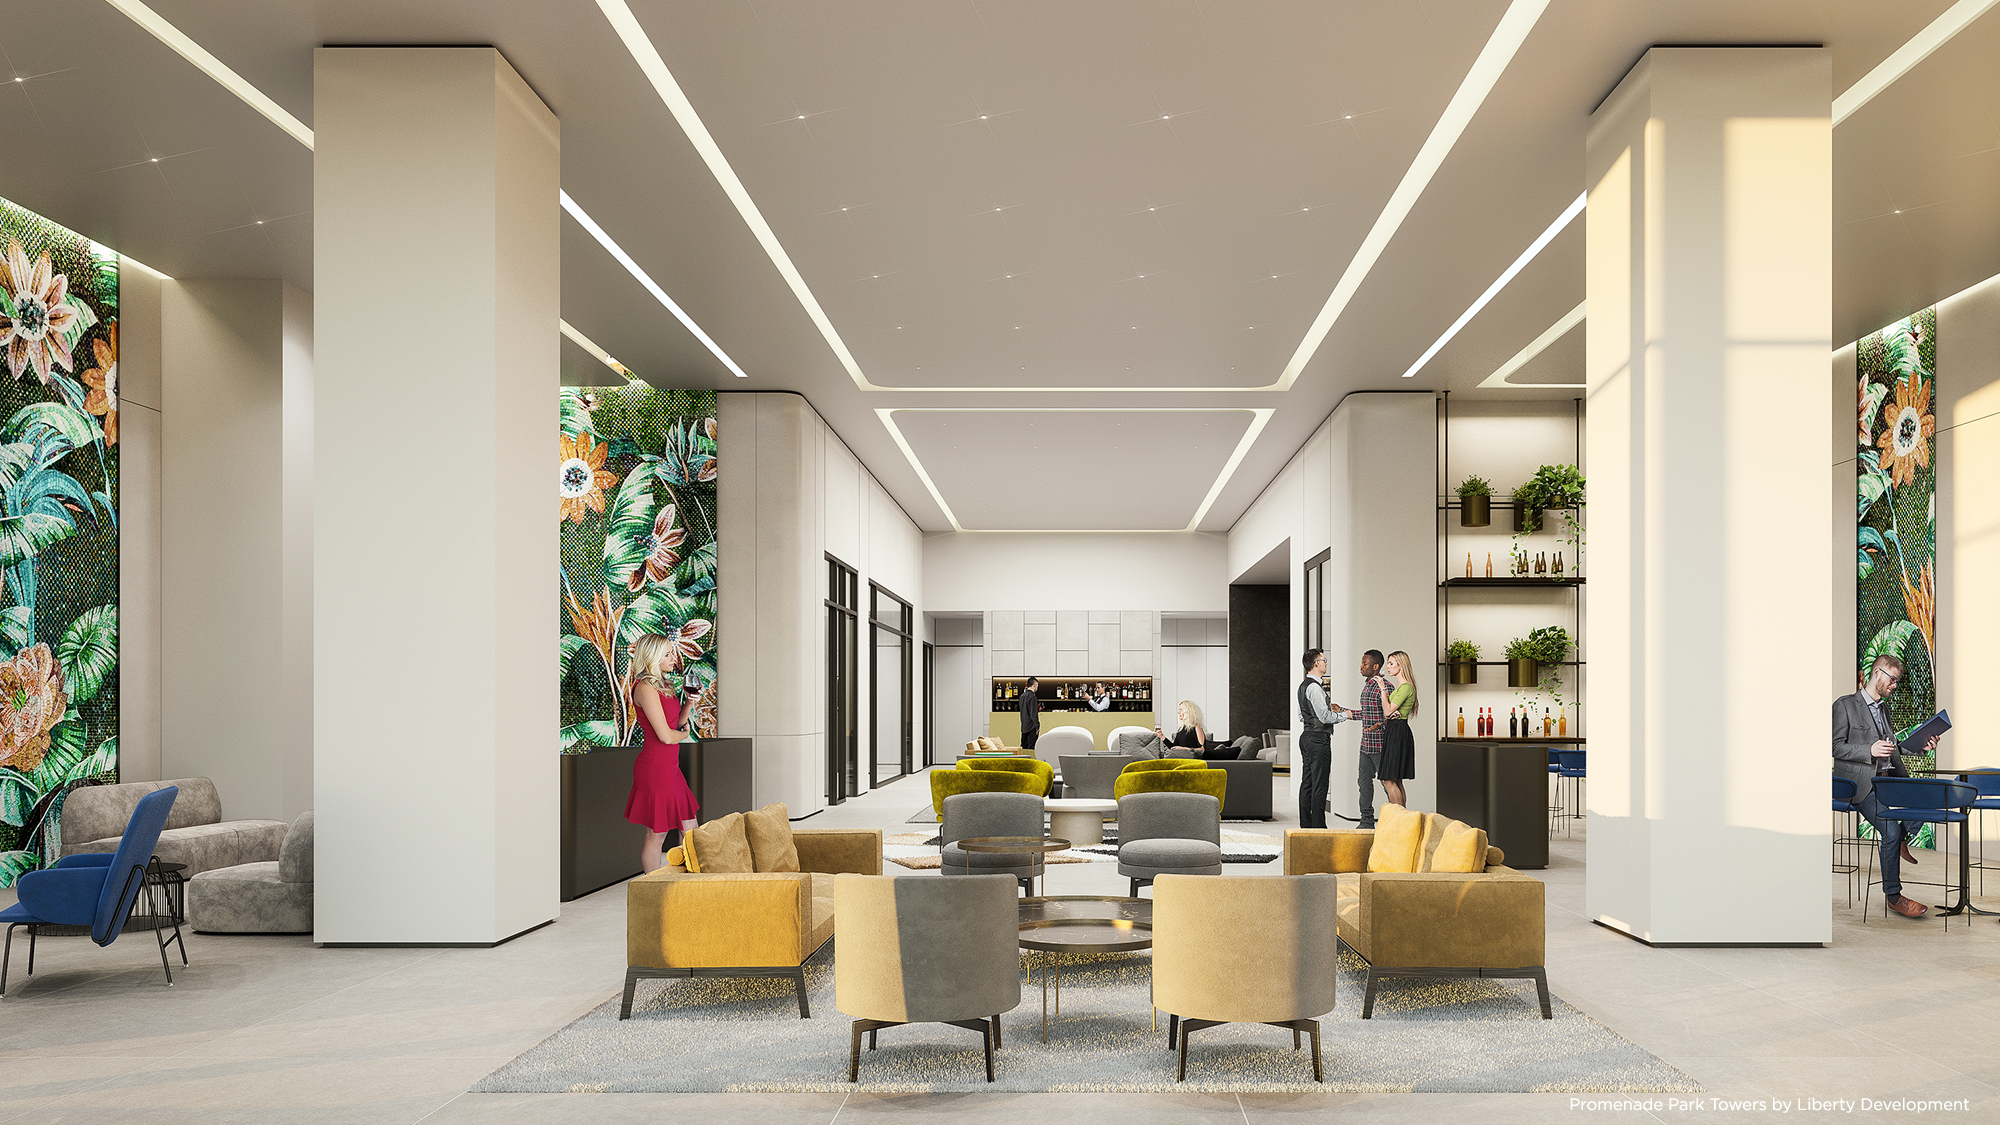 Promenade Park Towers - Party Room Rendering by Liberty Development